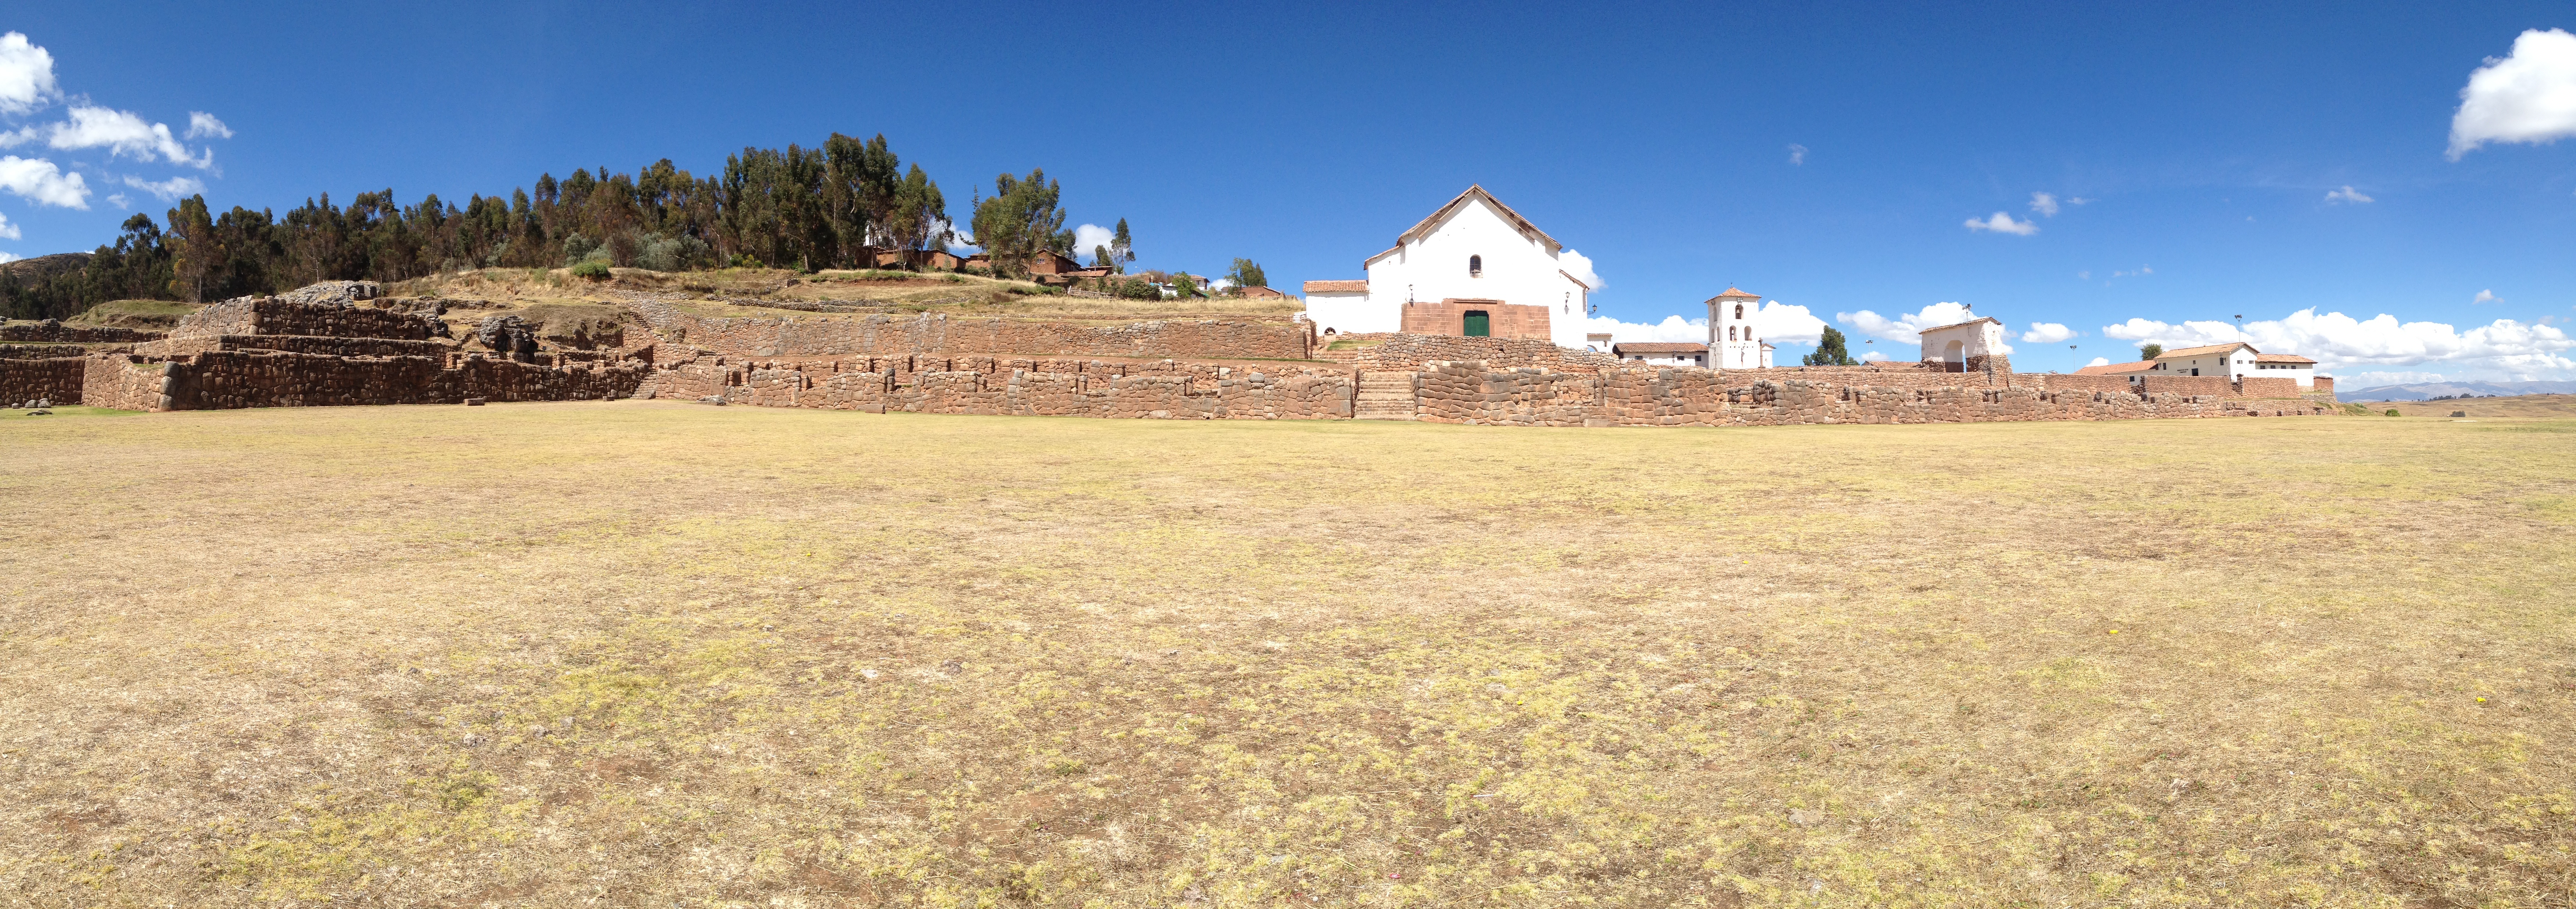 Our first stop on our motor bike tour,  Chinchero Church